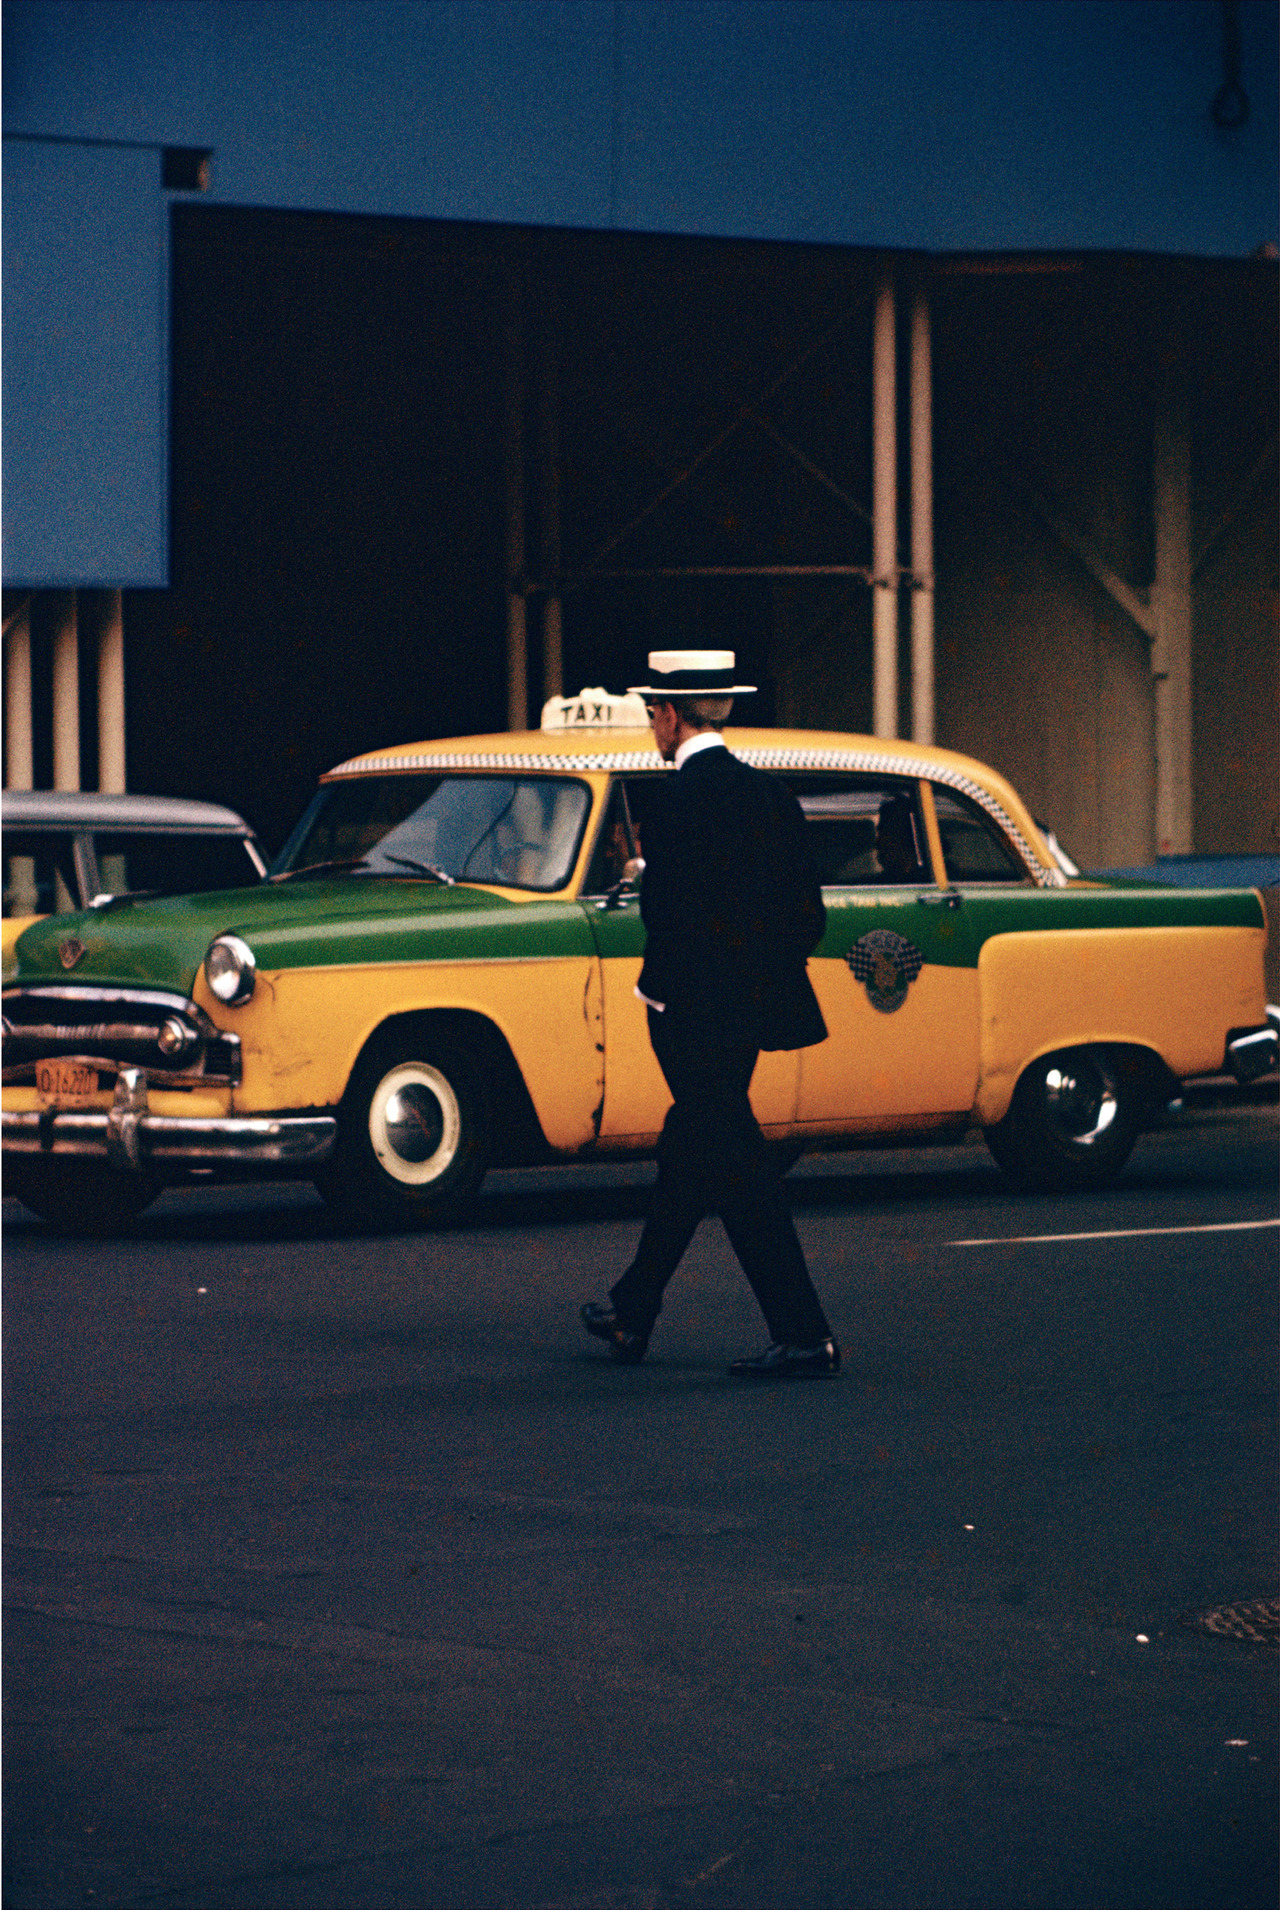 one-photo-day:
“ Saul Leiter
”